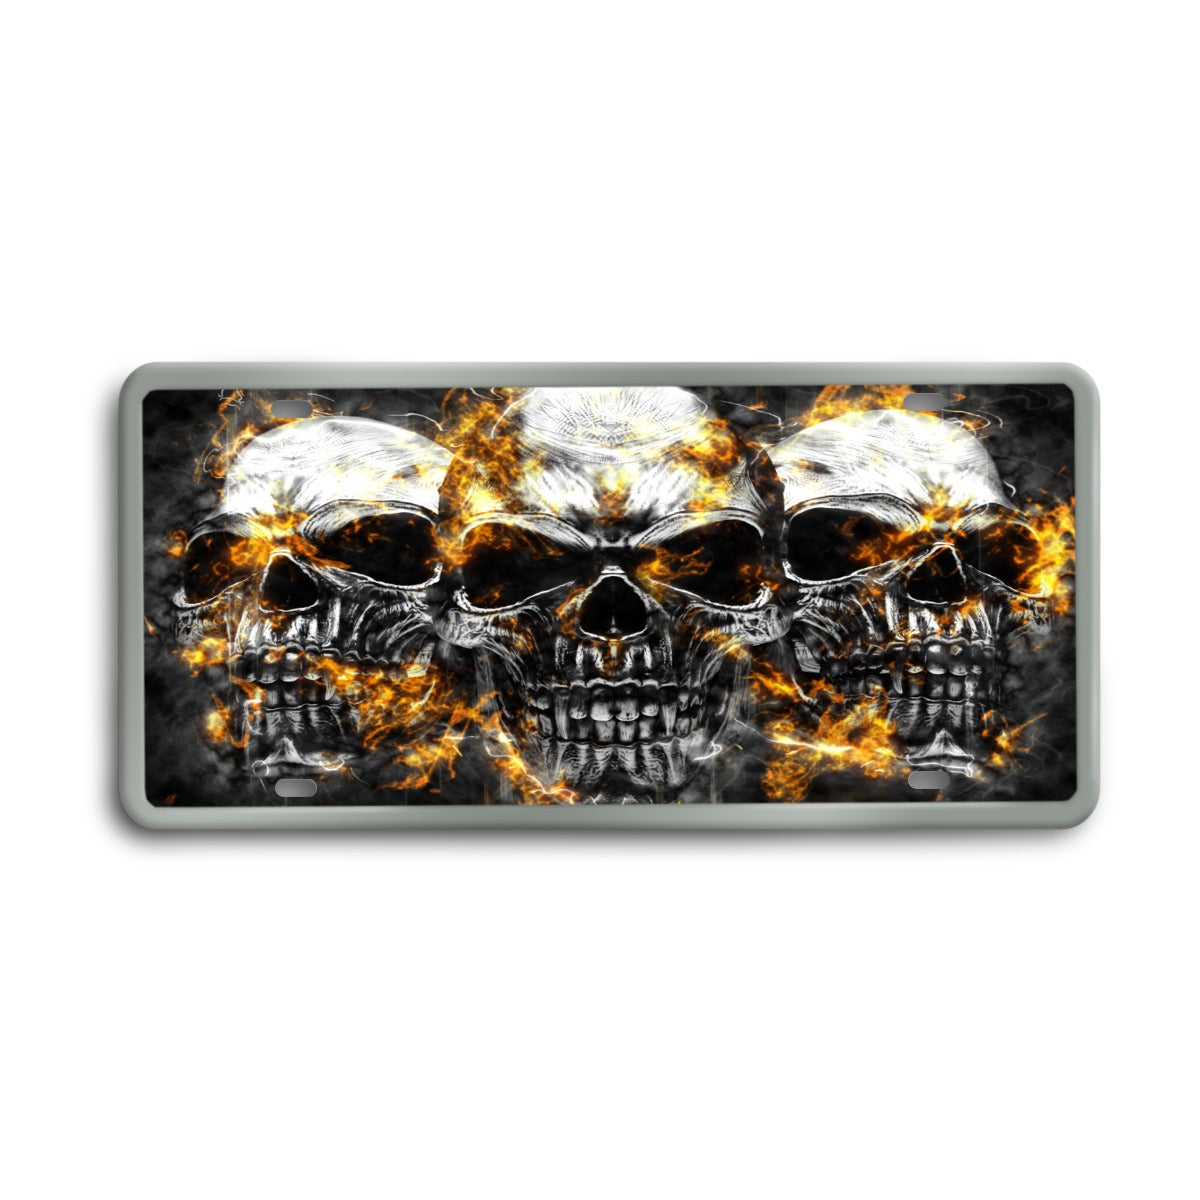 Flaming skull Vintage License Plate Decoration Painting, Fire skull gothic Halloween license plate